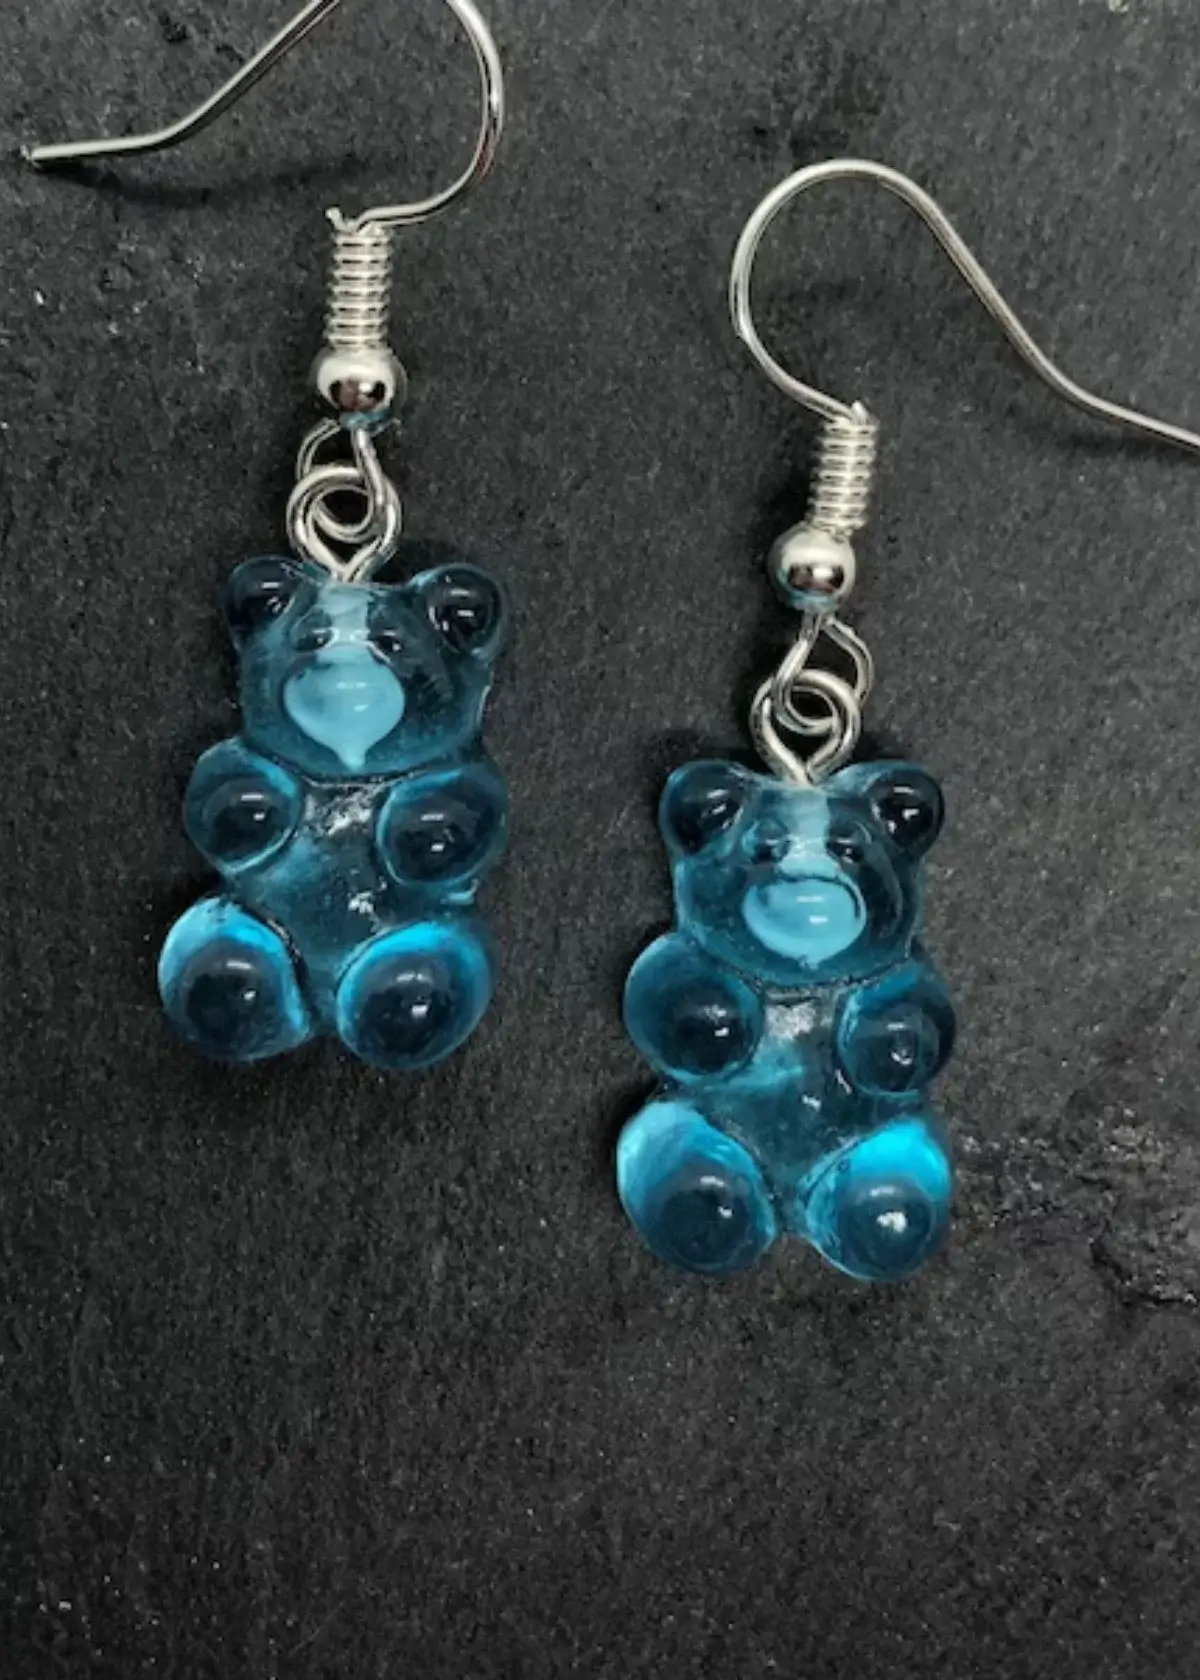 What materials are used to make gummy bear earrings?